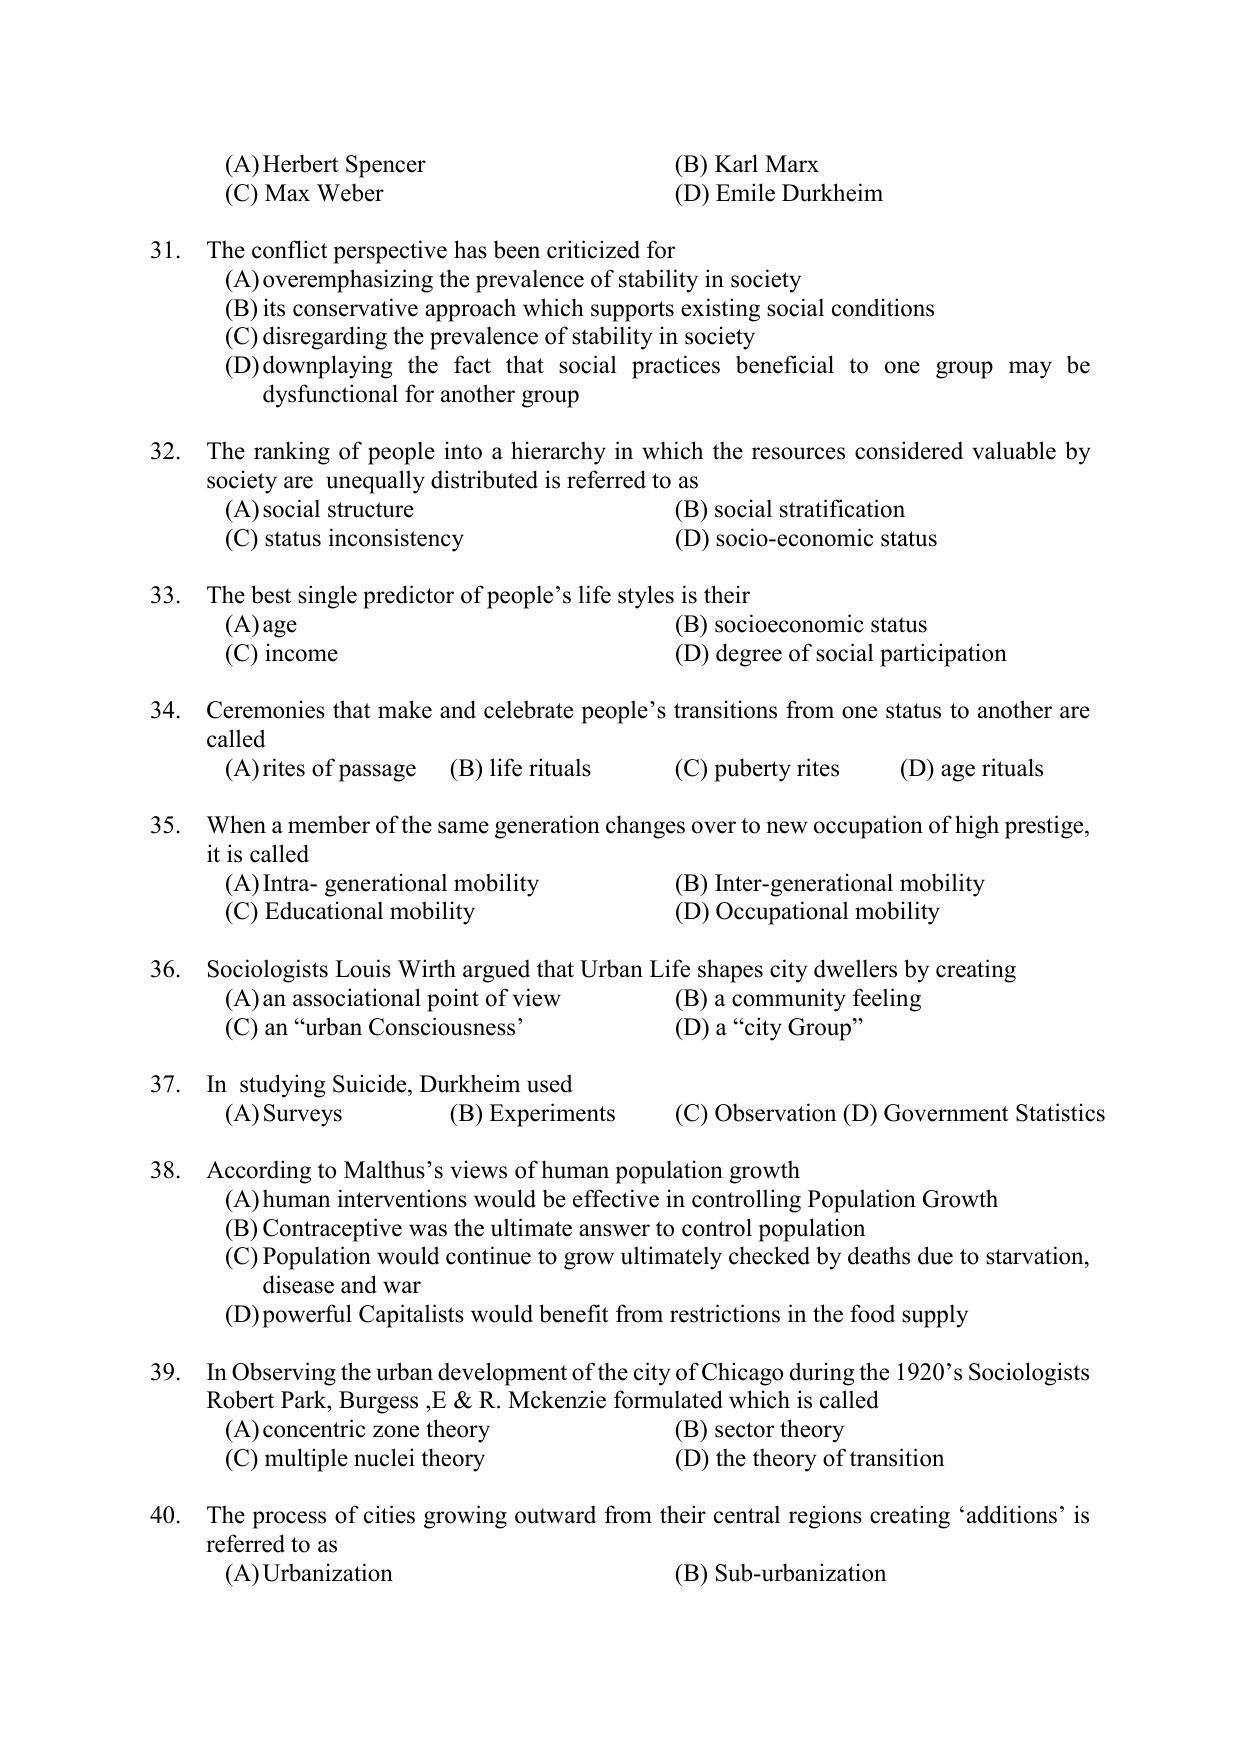 PU MPET Ancient Indian History & Archeology 2022 Question Papers - Page 73